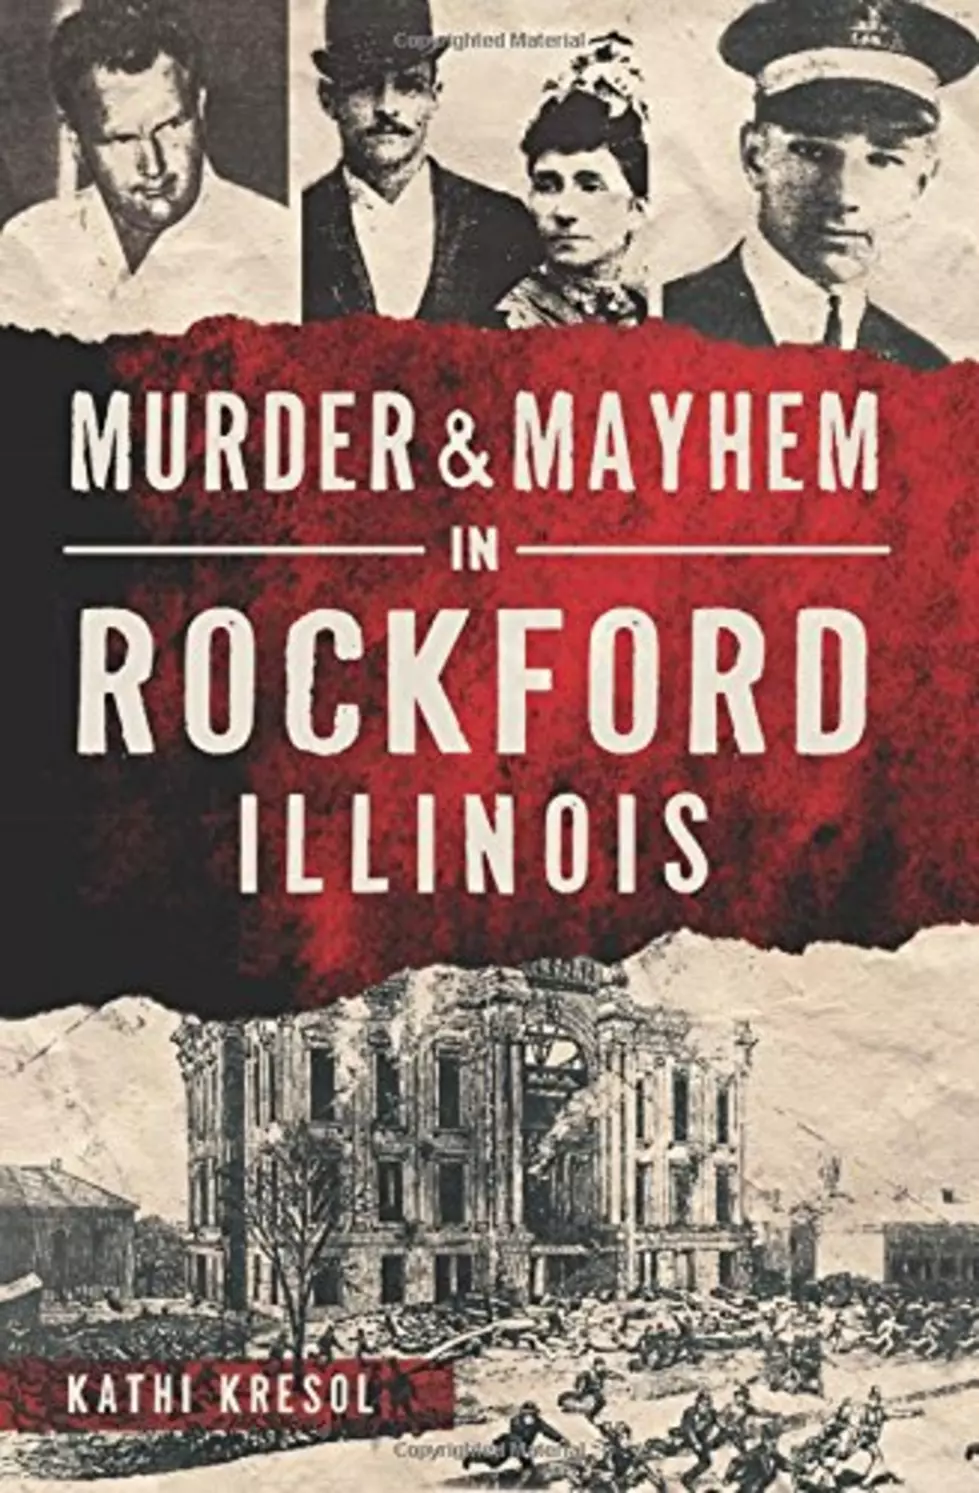 Local Author Writes Book About Rockford’s Murky Past